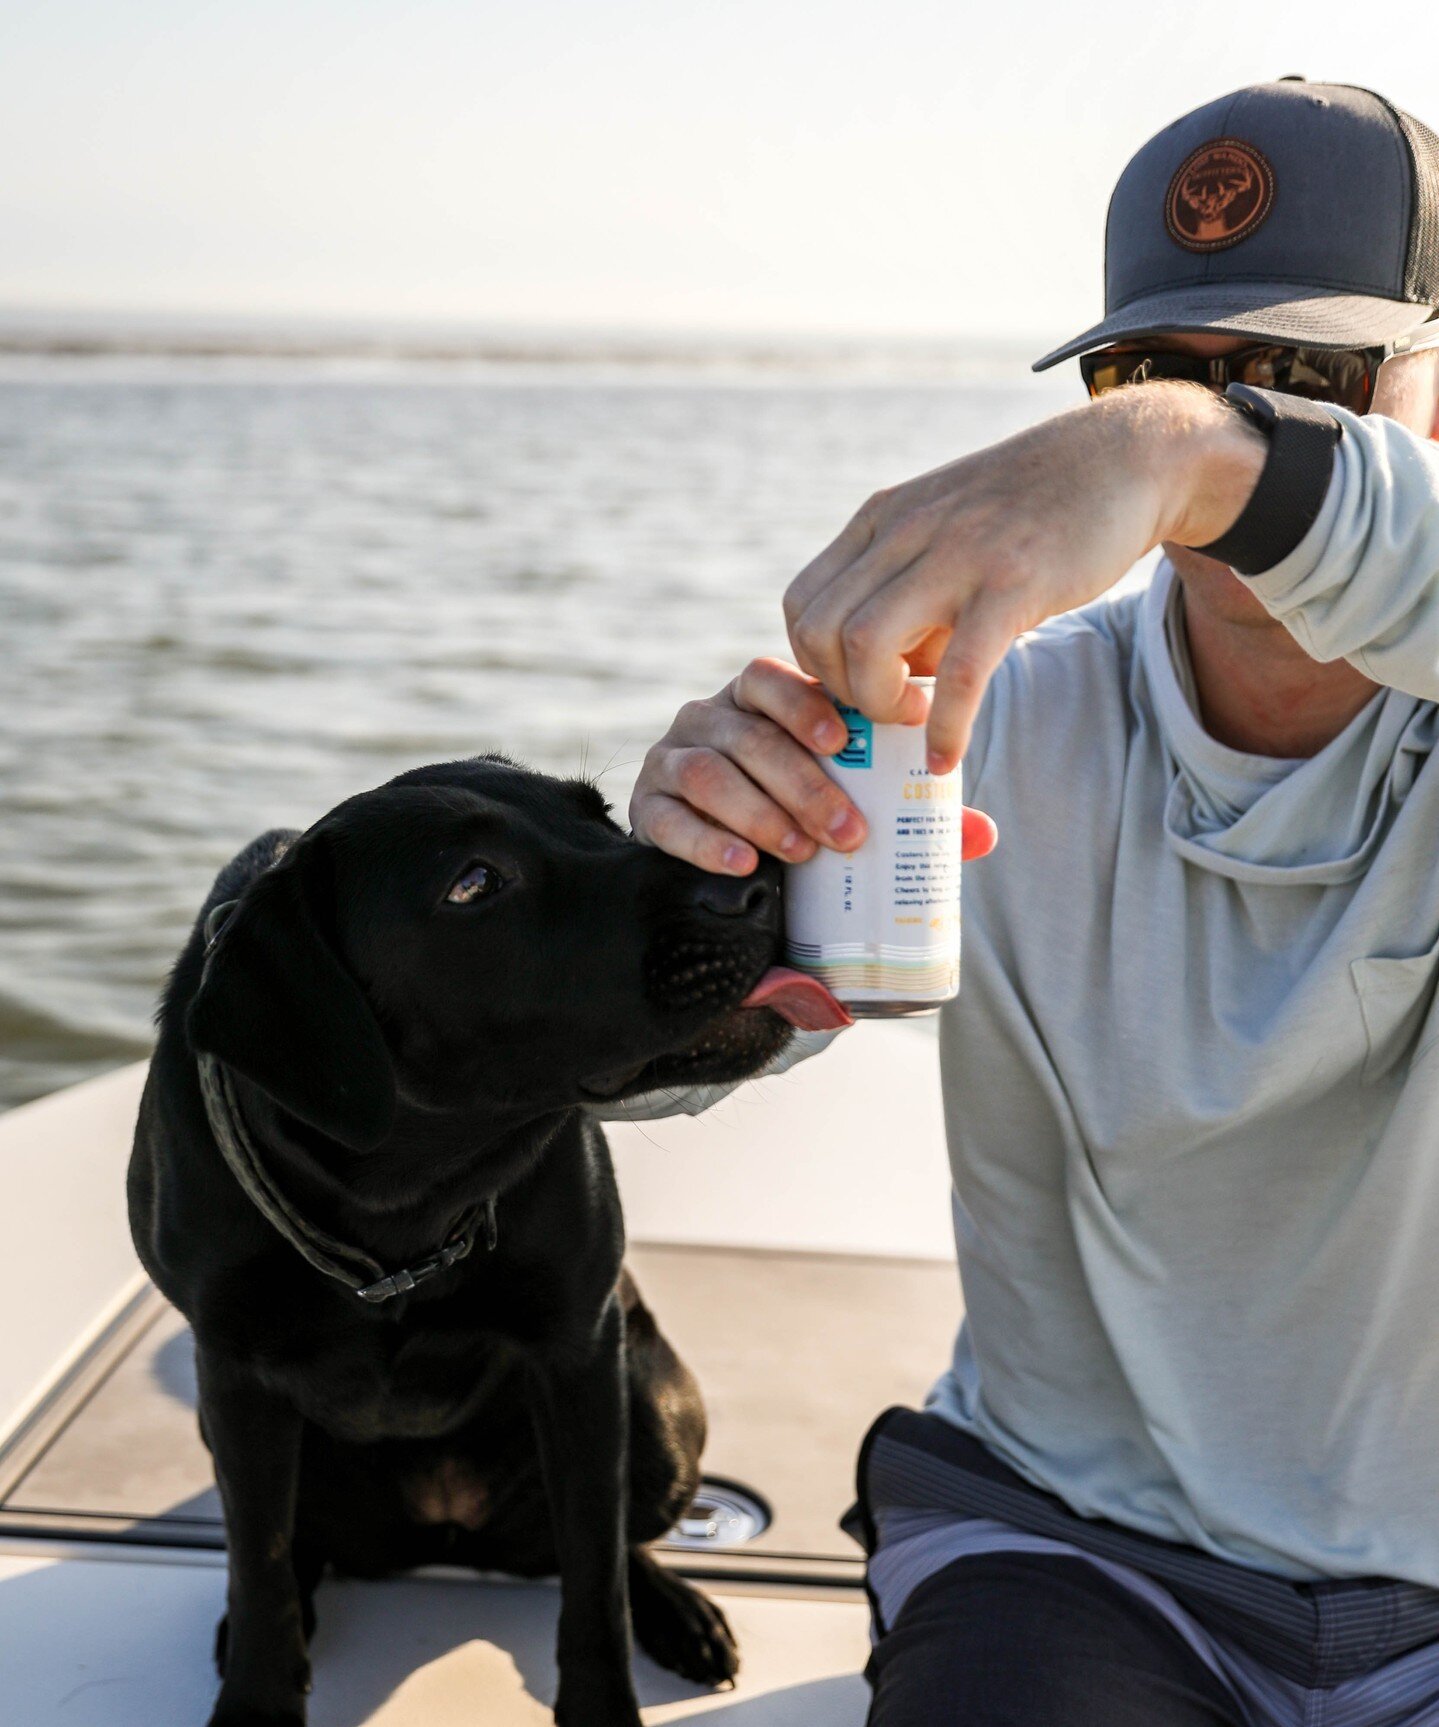 A cold beer in hand and man's best friend by your side somewhere on the water.  Who's In?

📸: @capt_forrest_powpow